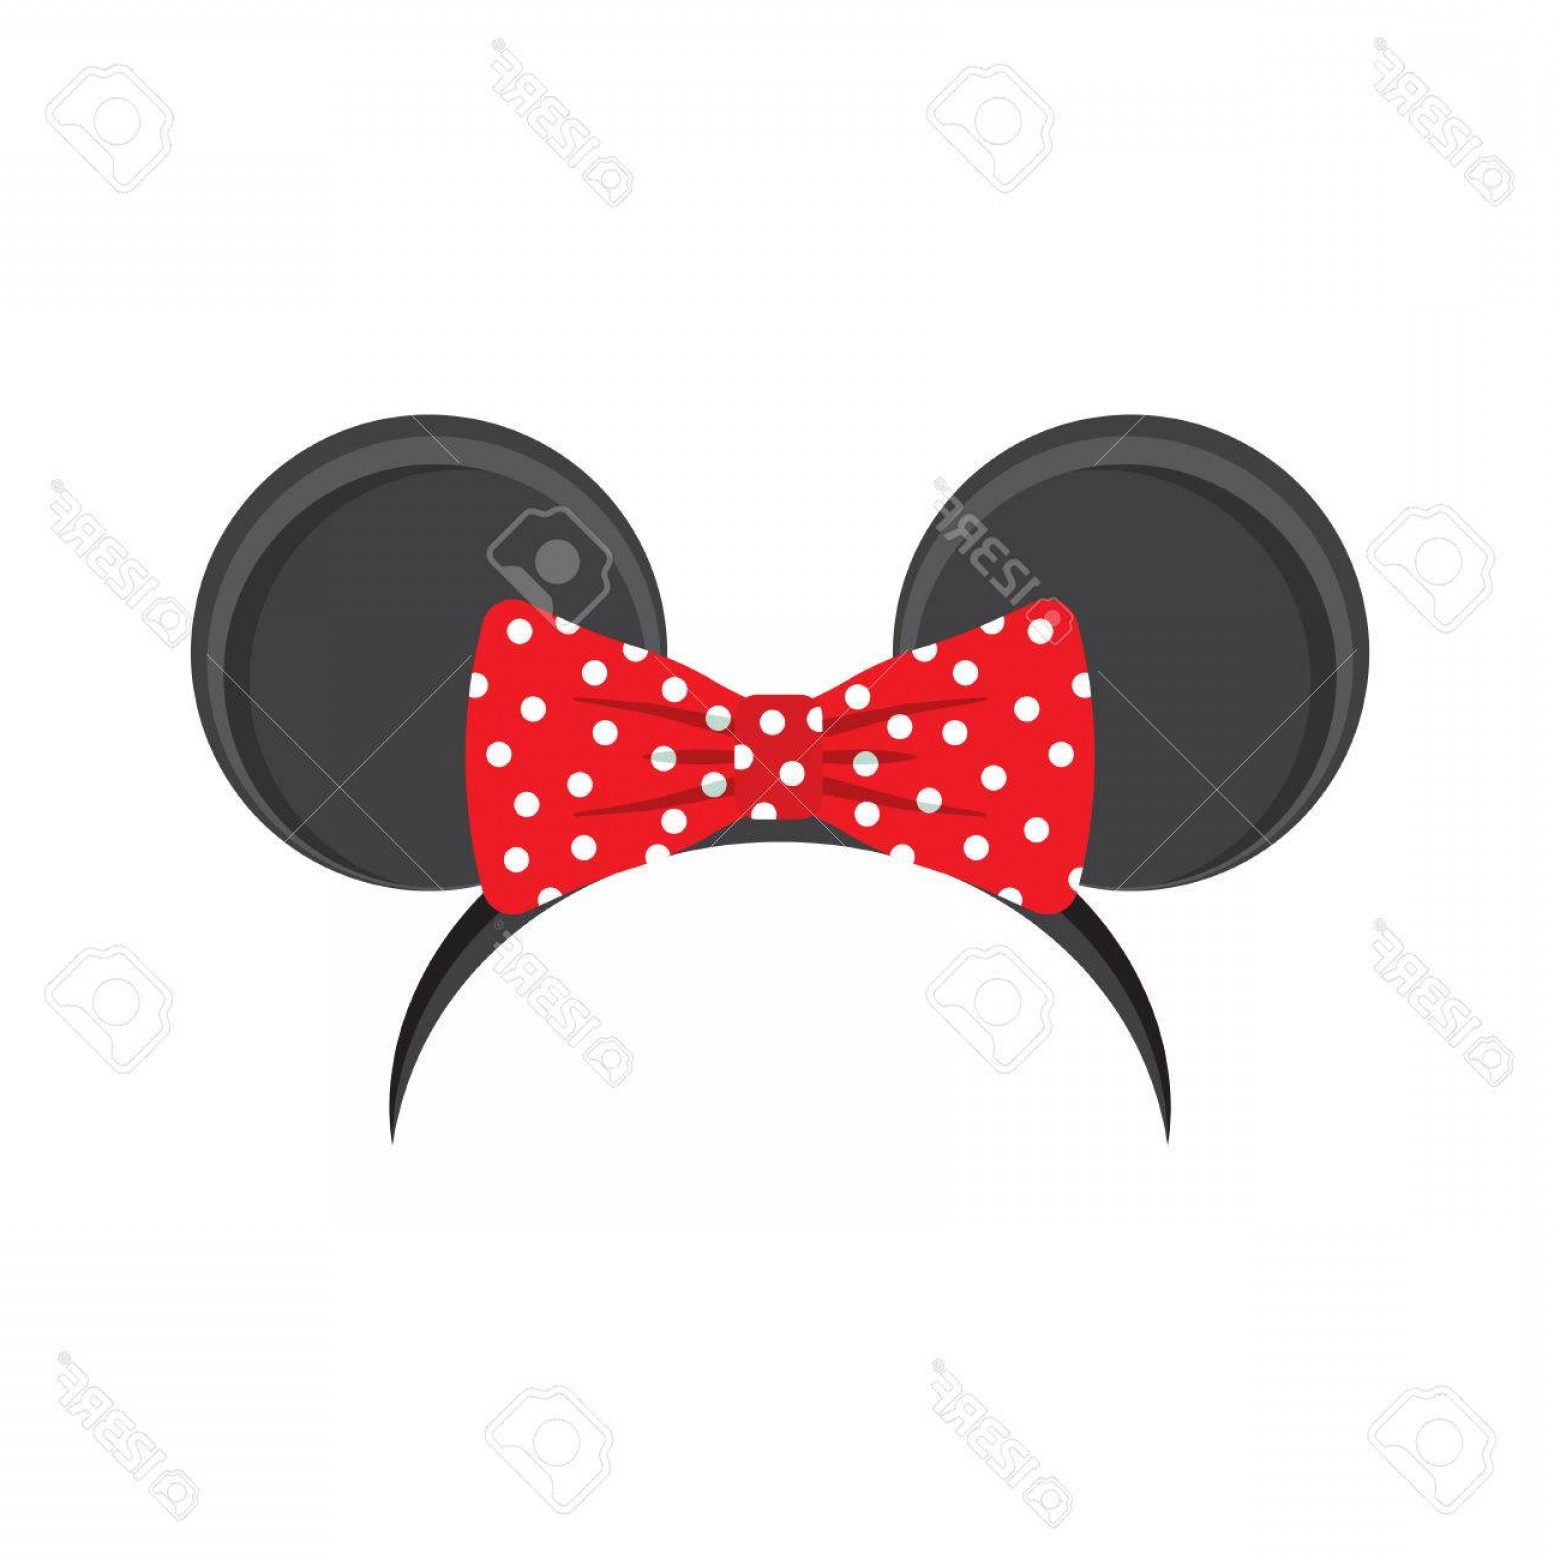 Mickey mouse ears.